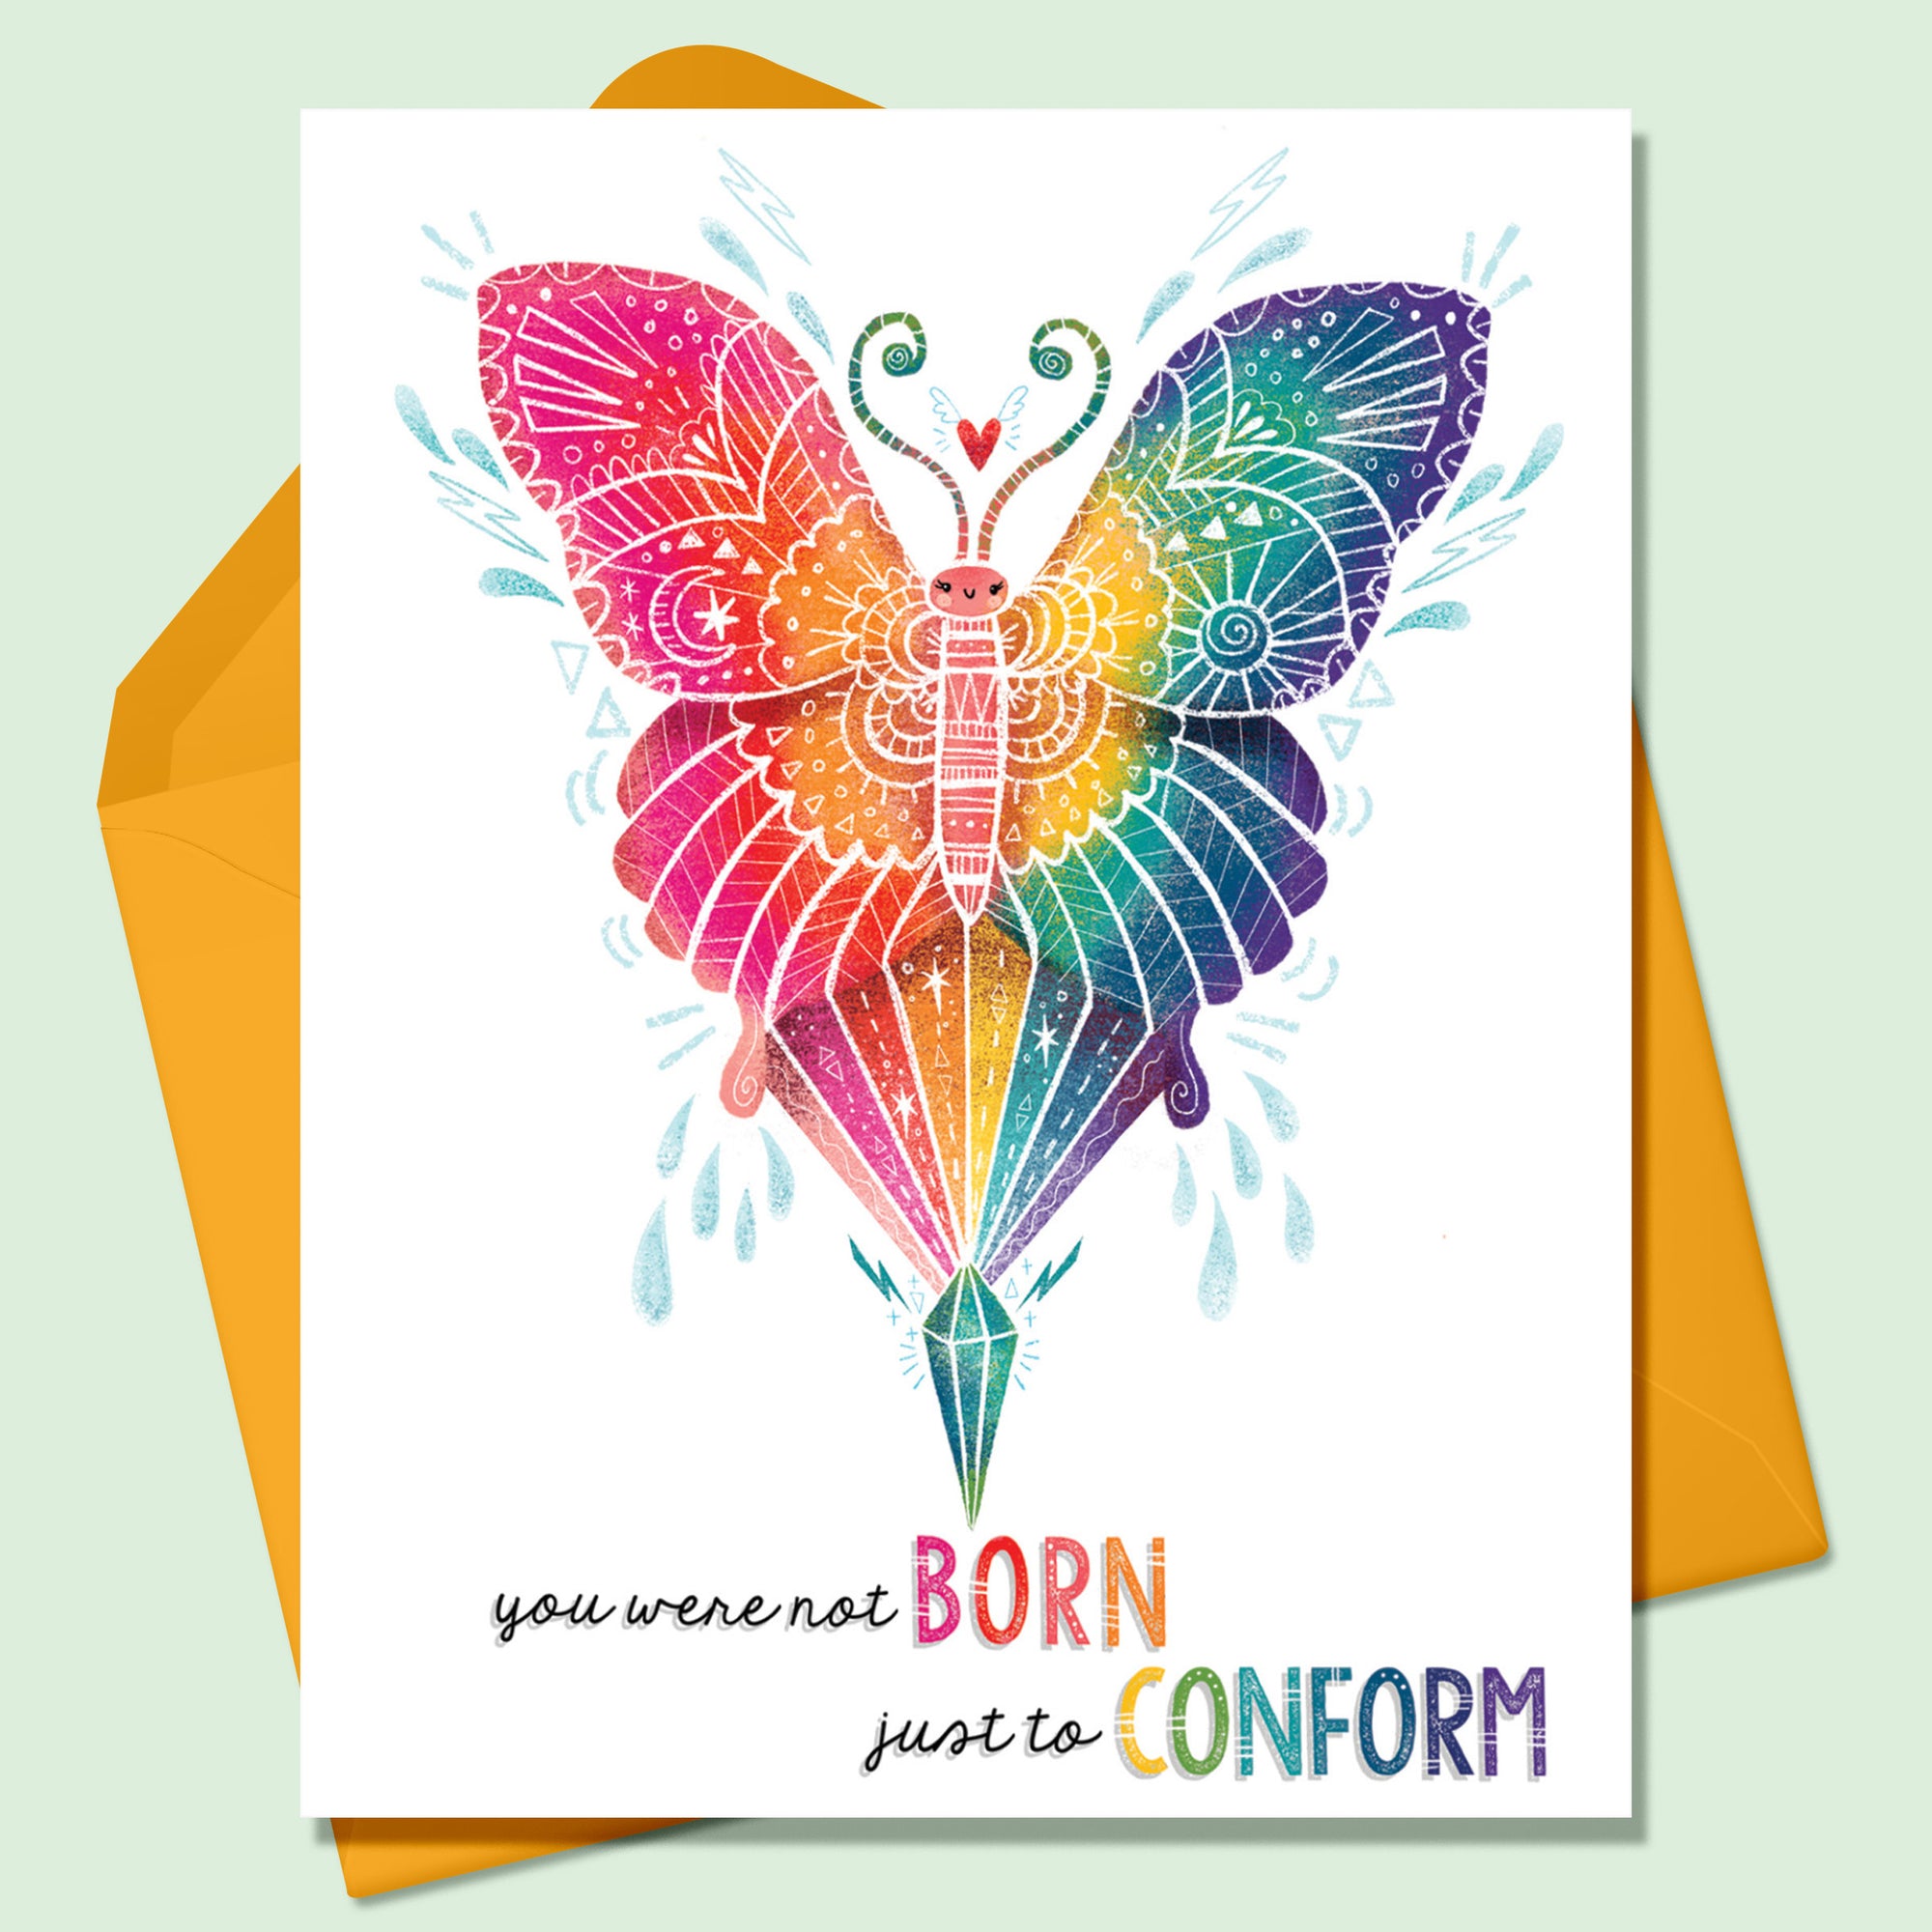 Rainbow colored butterfly image with white decorative details on a white background. The words You Were Not Born Just to Conform written on the greeting card. There is an orange envelope that sits on a mint green background.